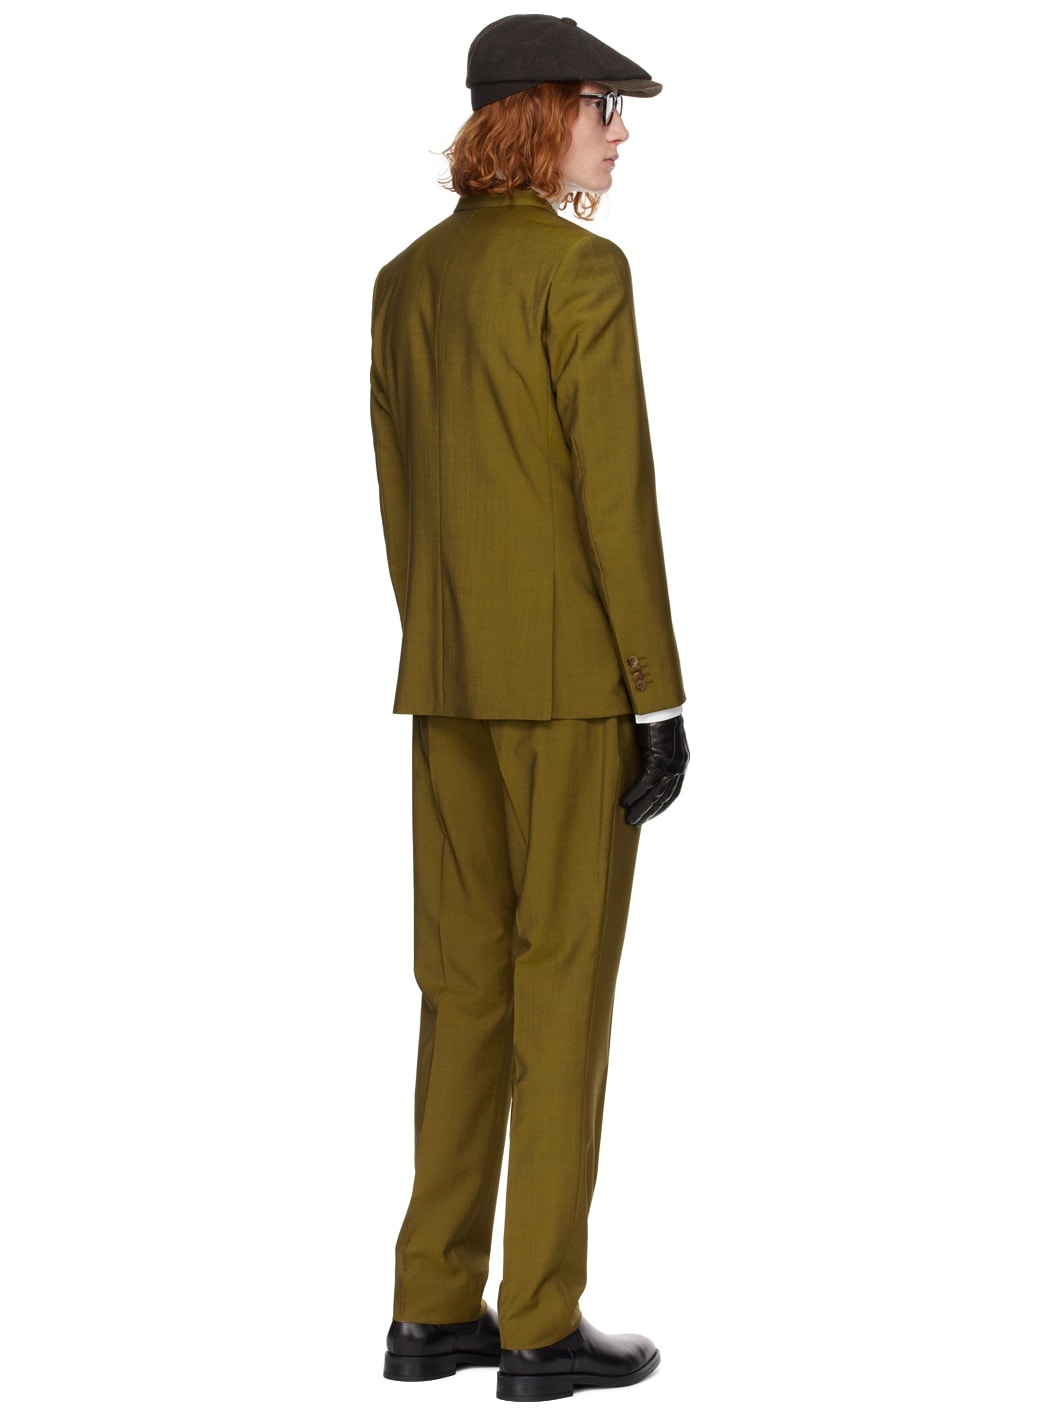 Yellow 'The Brierley' Suit - 3